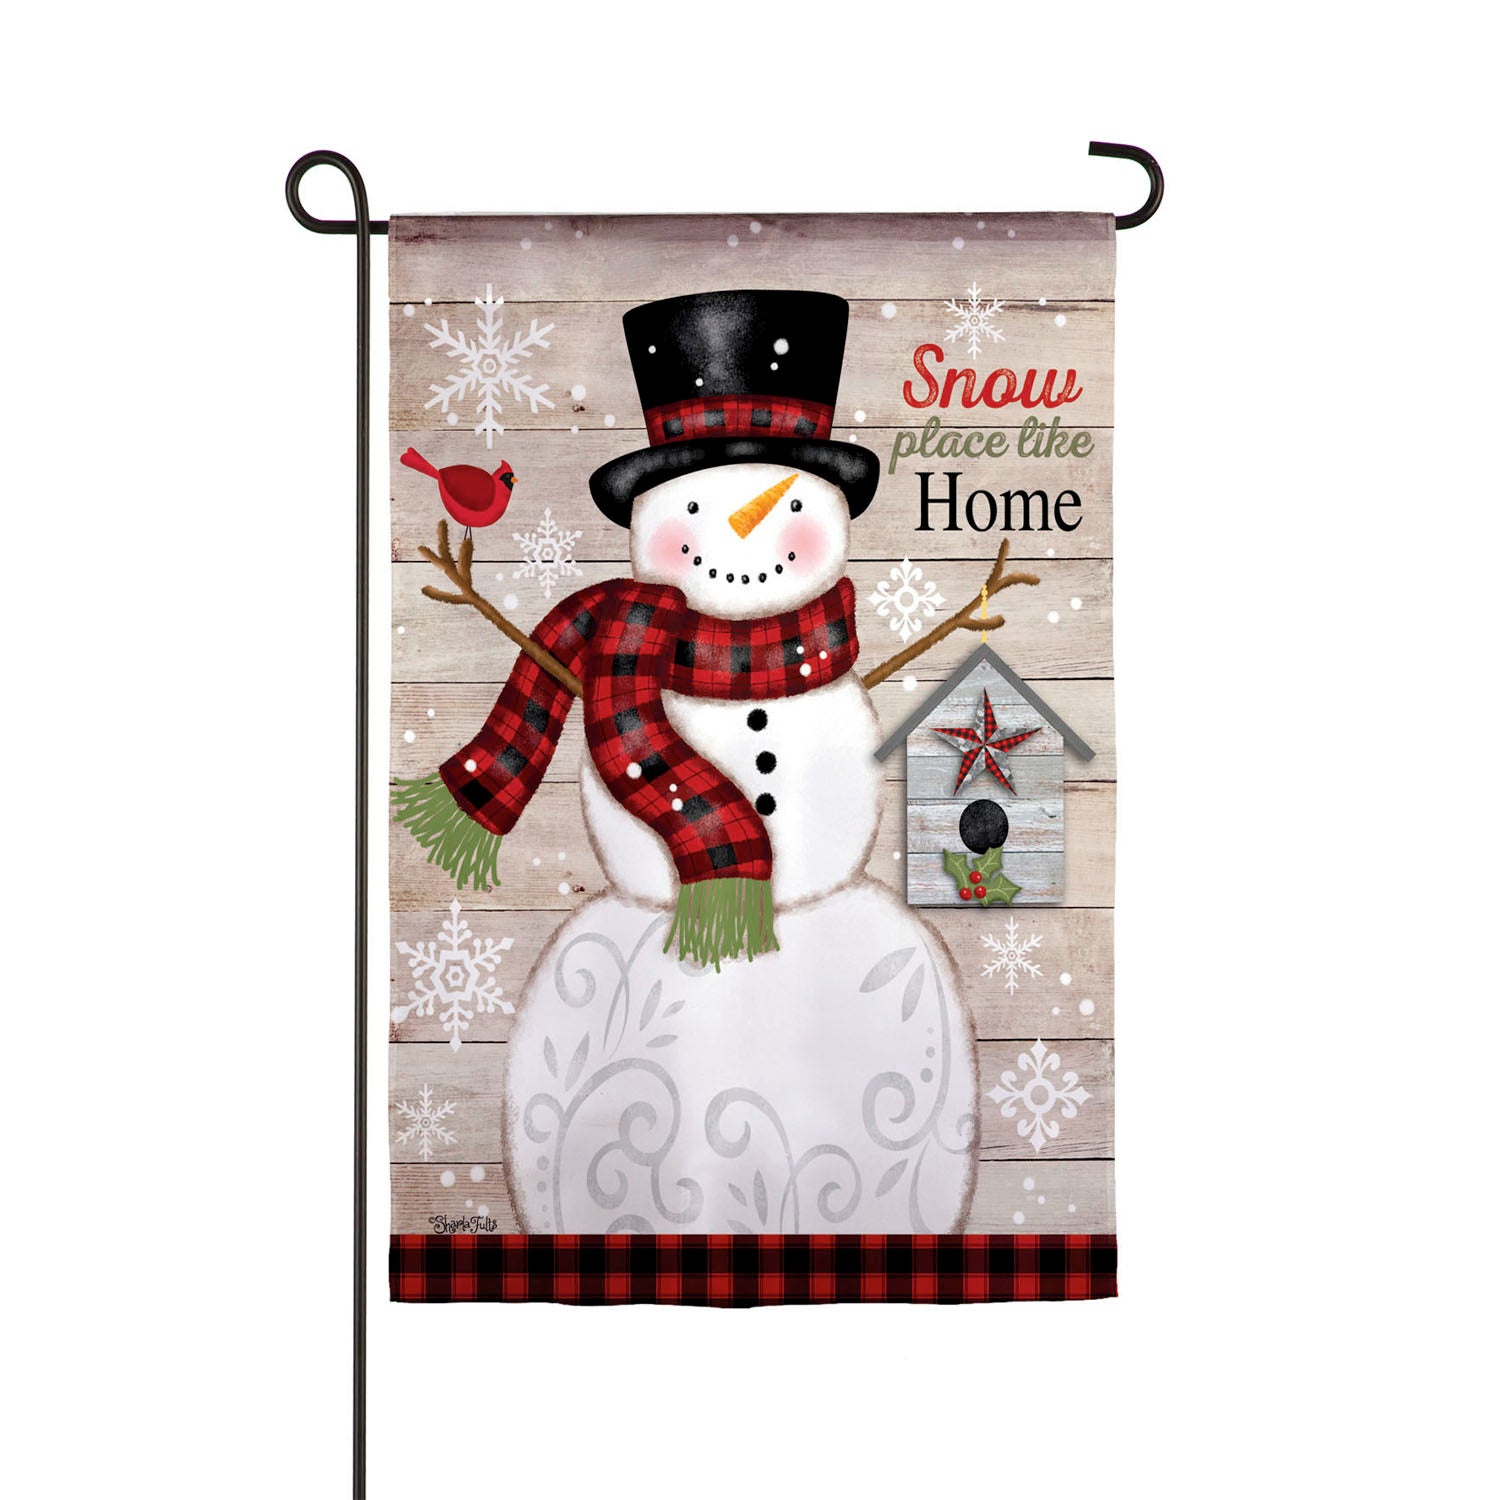 Snow Place Like Home Garden Textured Suede Flag